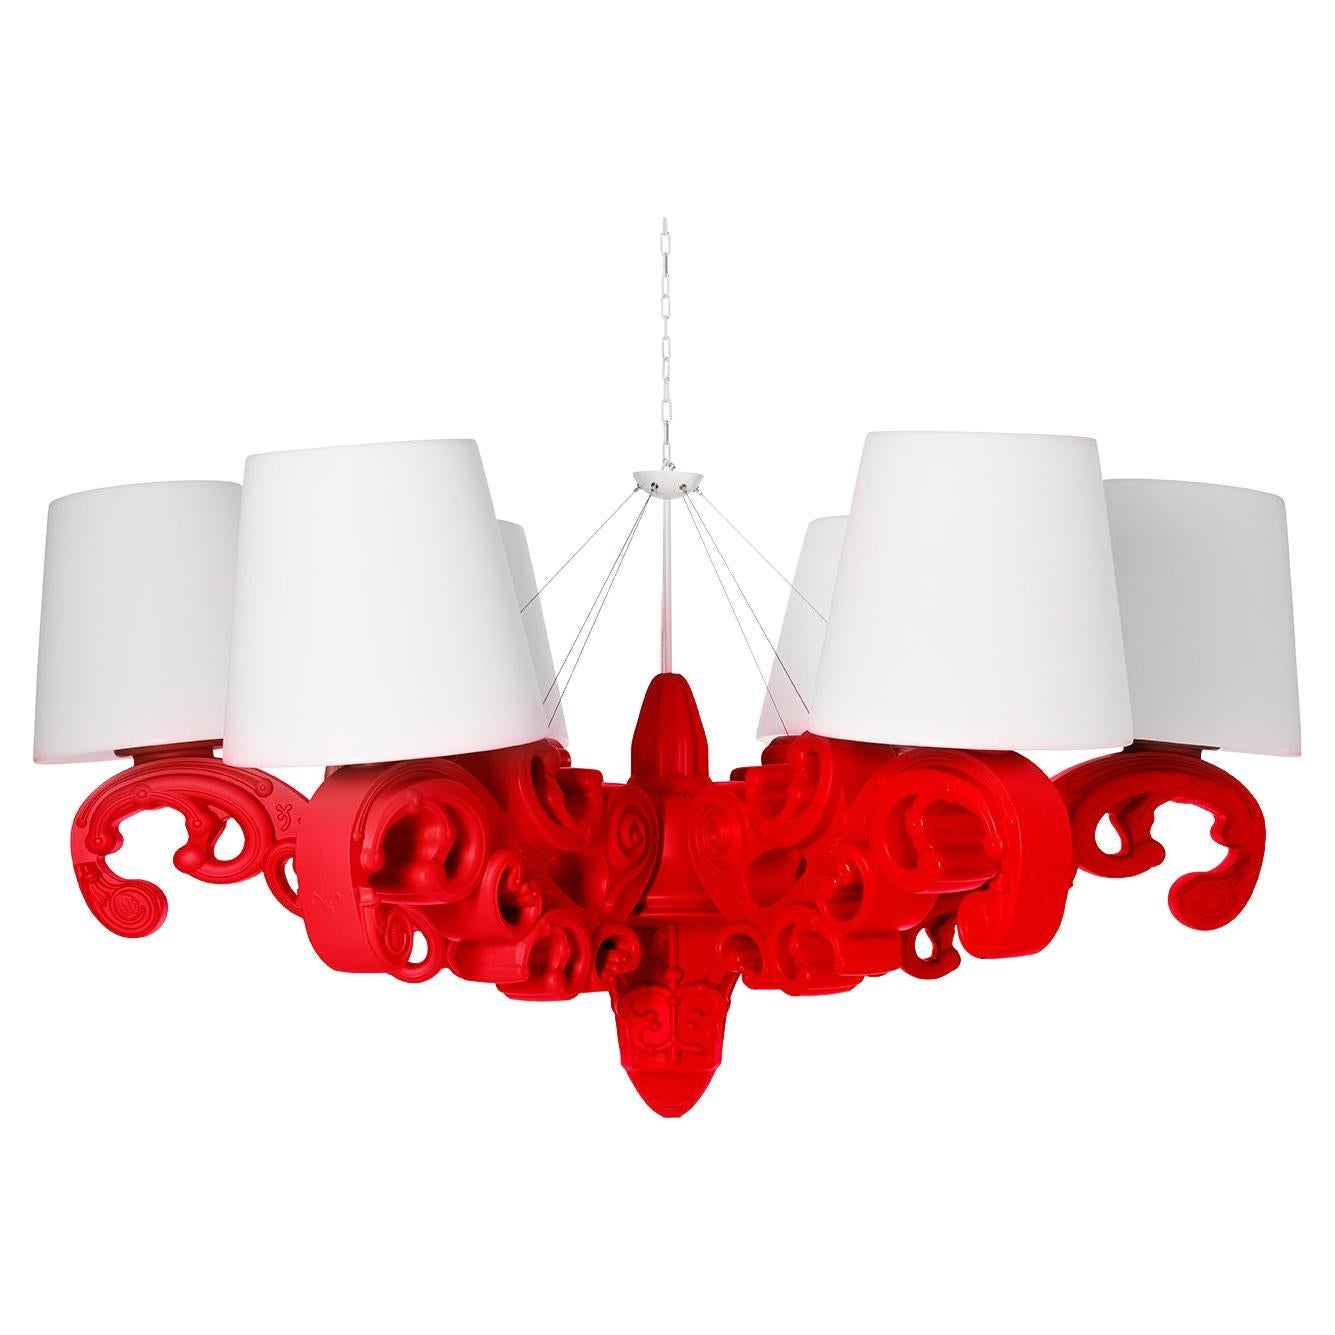 Slide Design Crown of Love Pendant Light in Flame Red by Moro, Pigatti For Sale